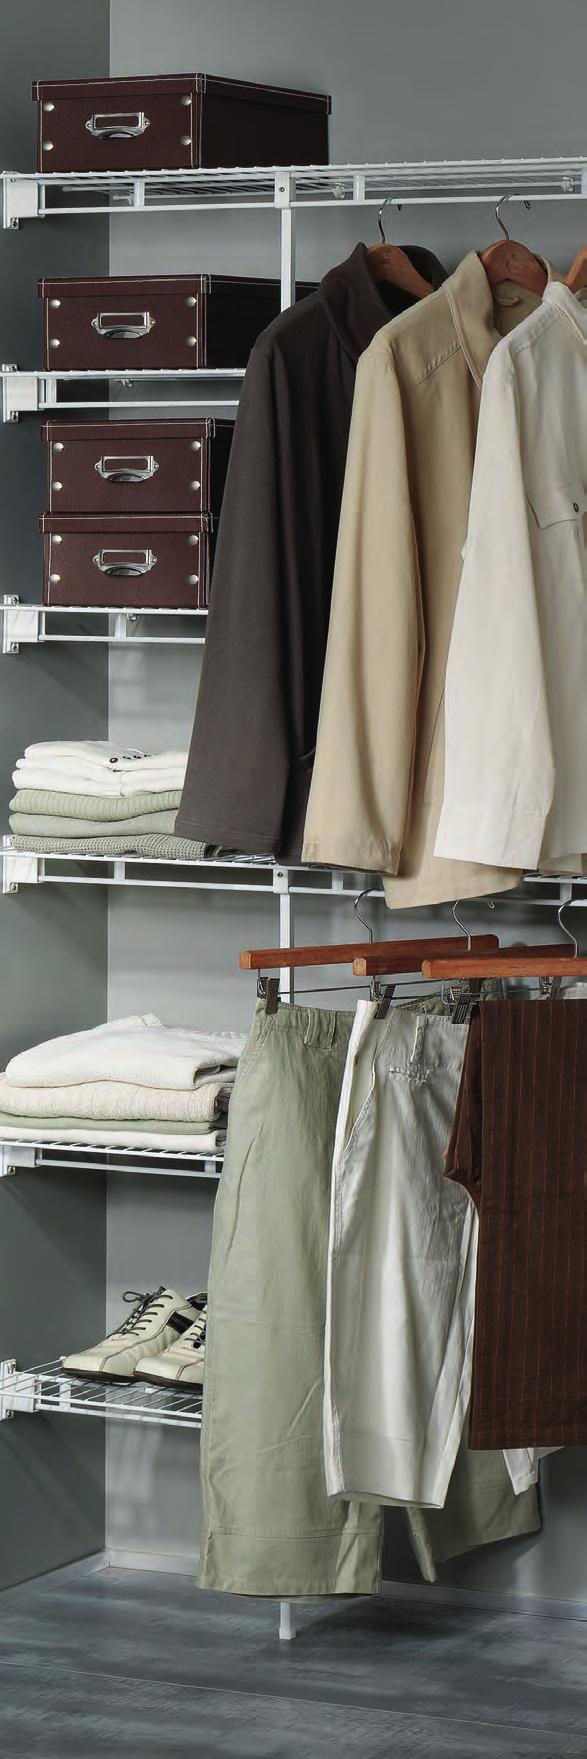 Wire wardrobe organisers come in a large range of wire shelving units, with an option to add drawer and shelf towers, baskets and other storage